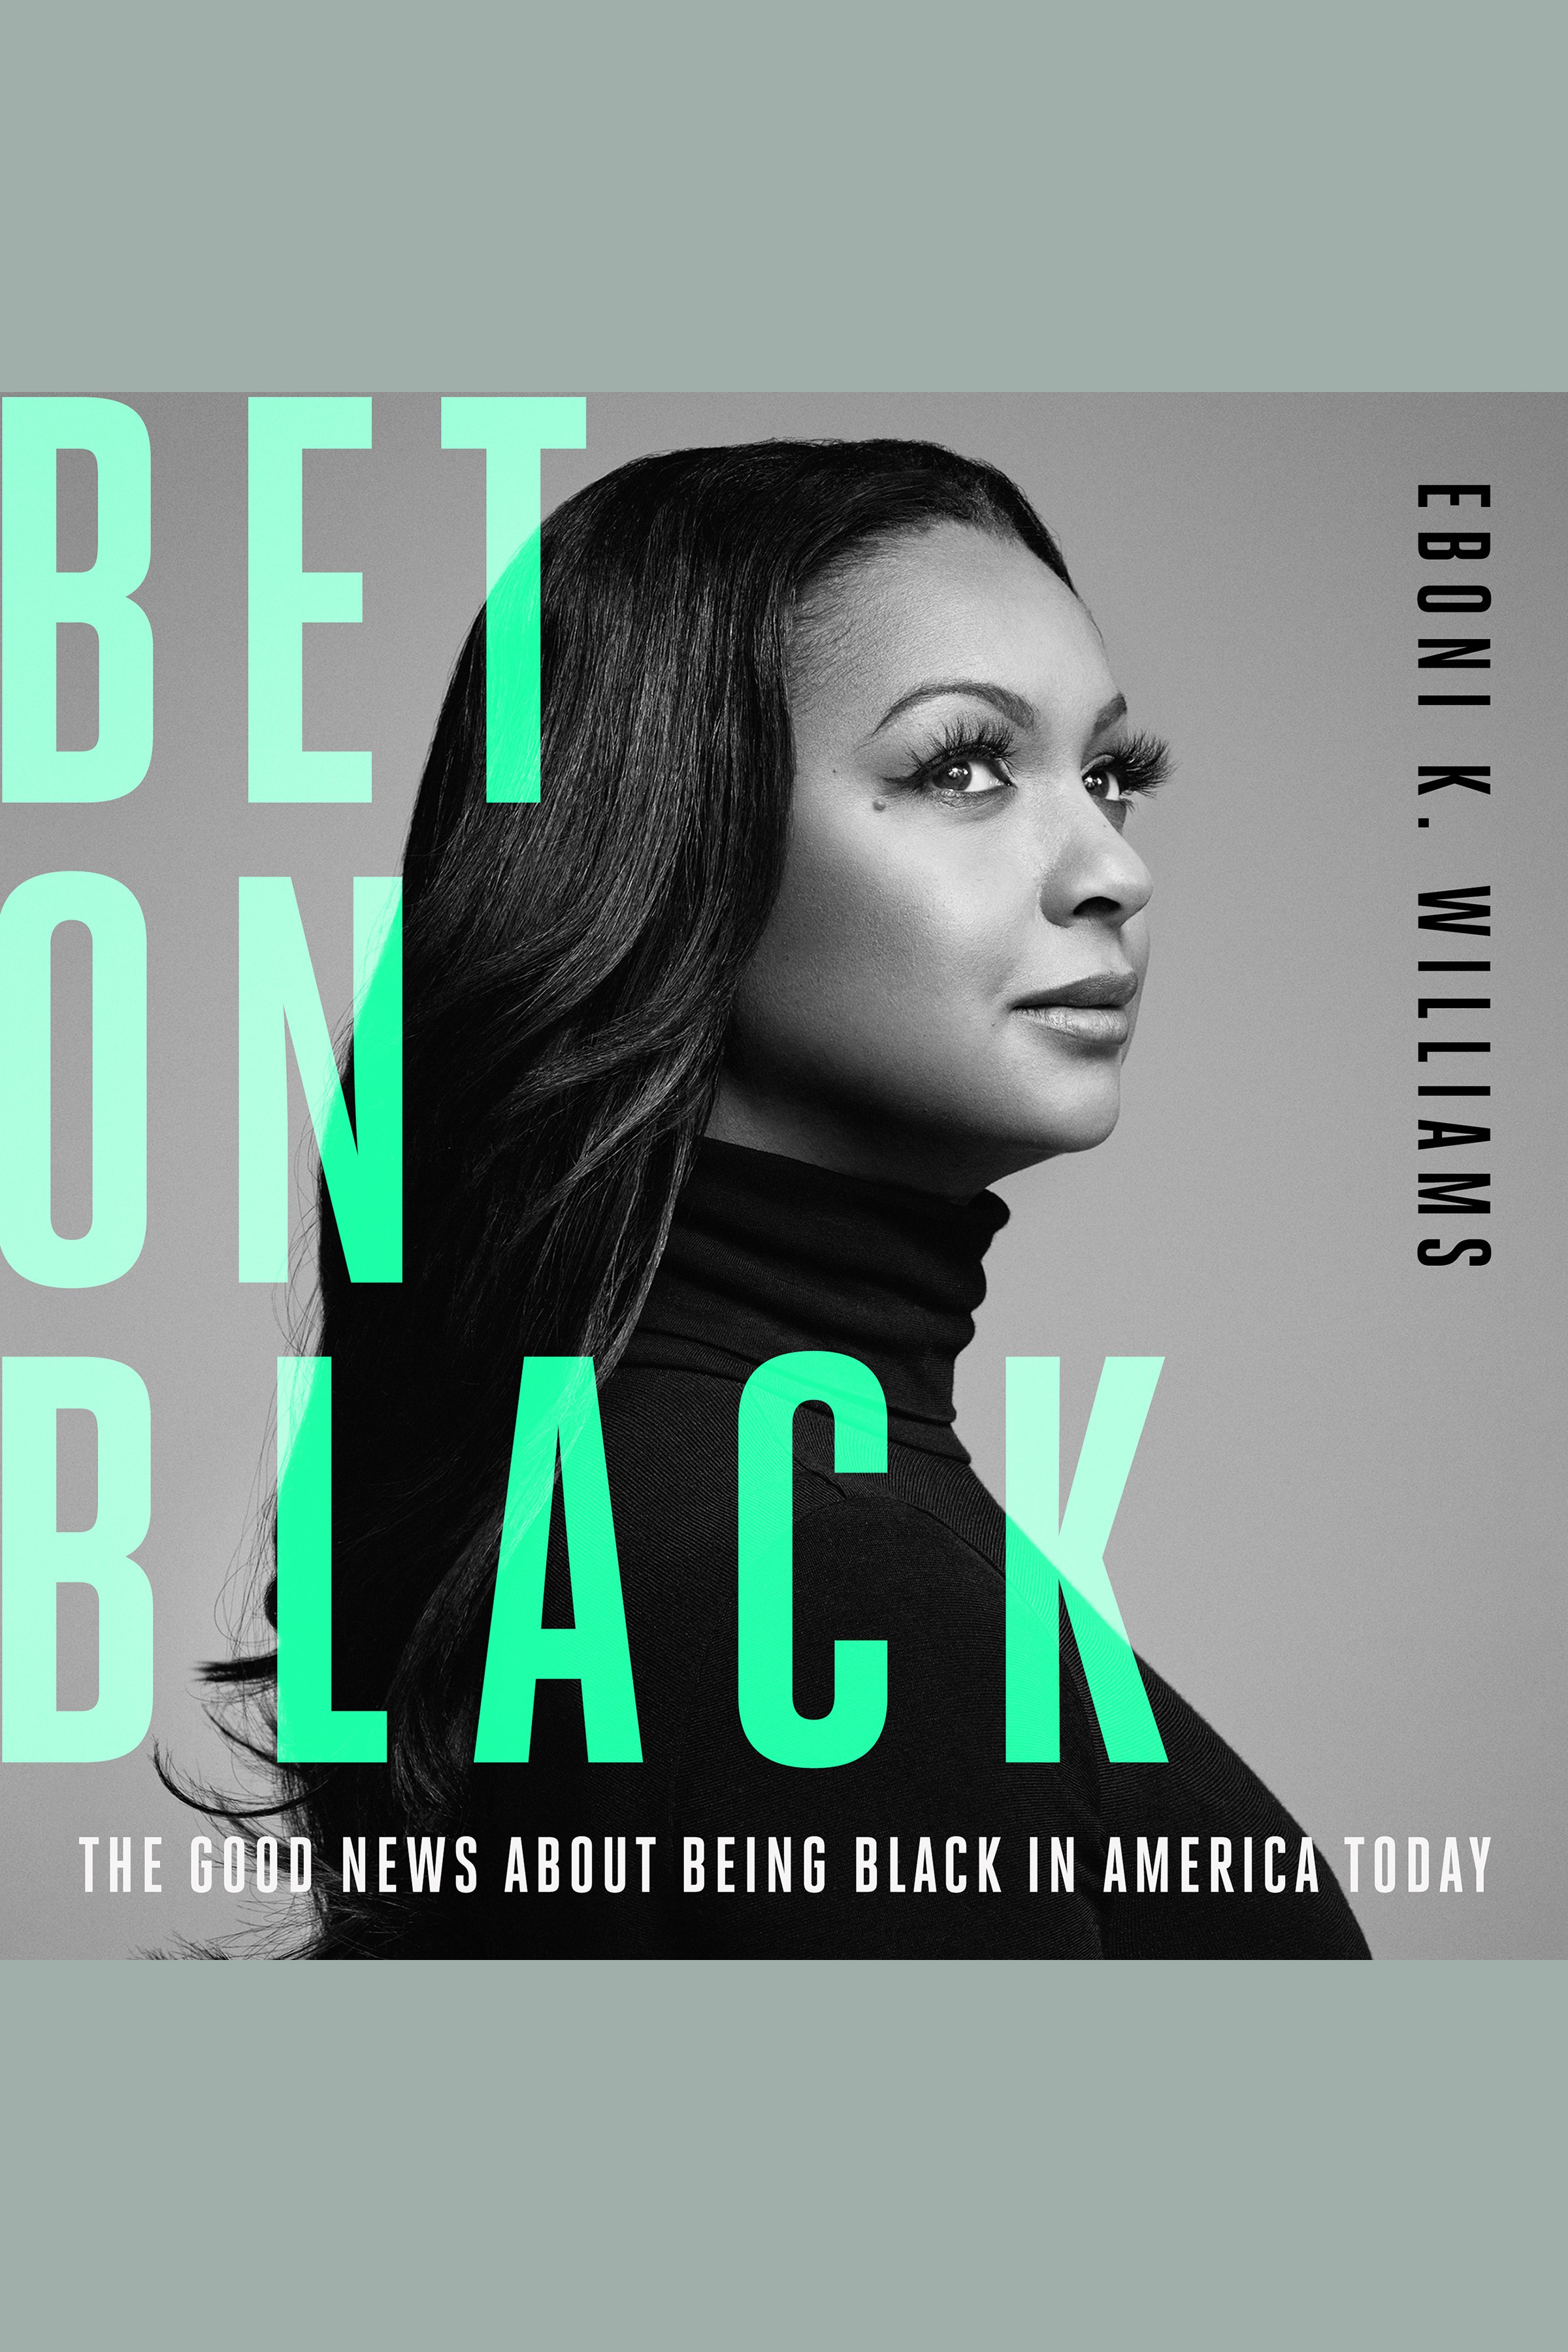 Bet on Black The Good News about Being Black in America Today